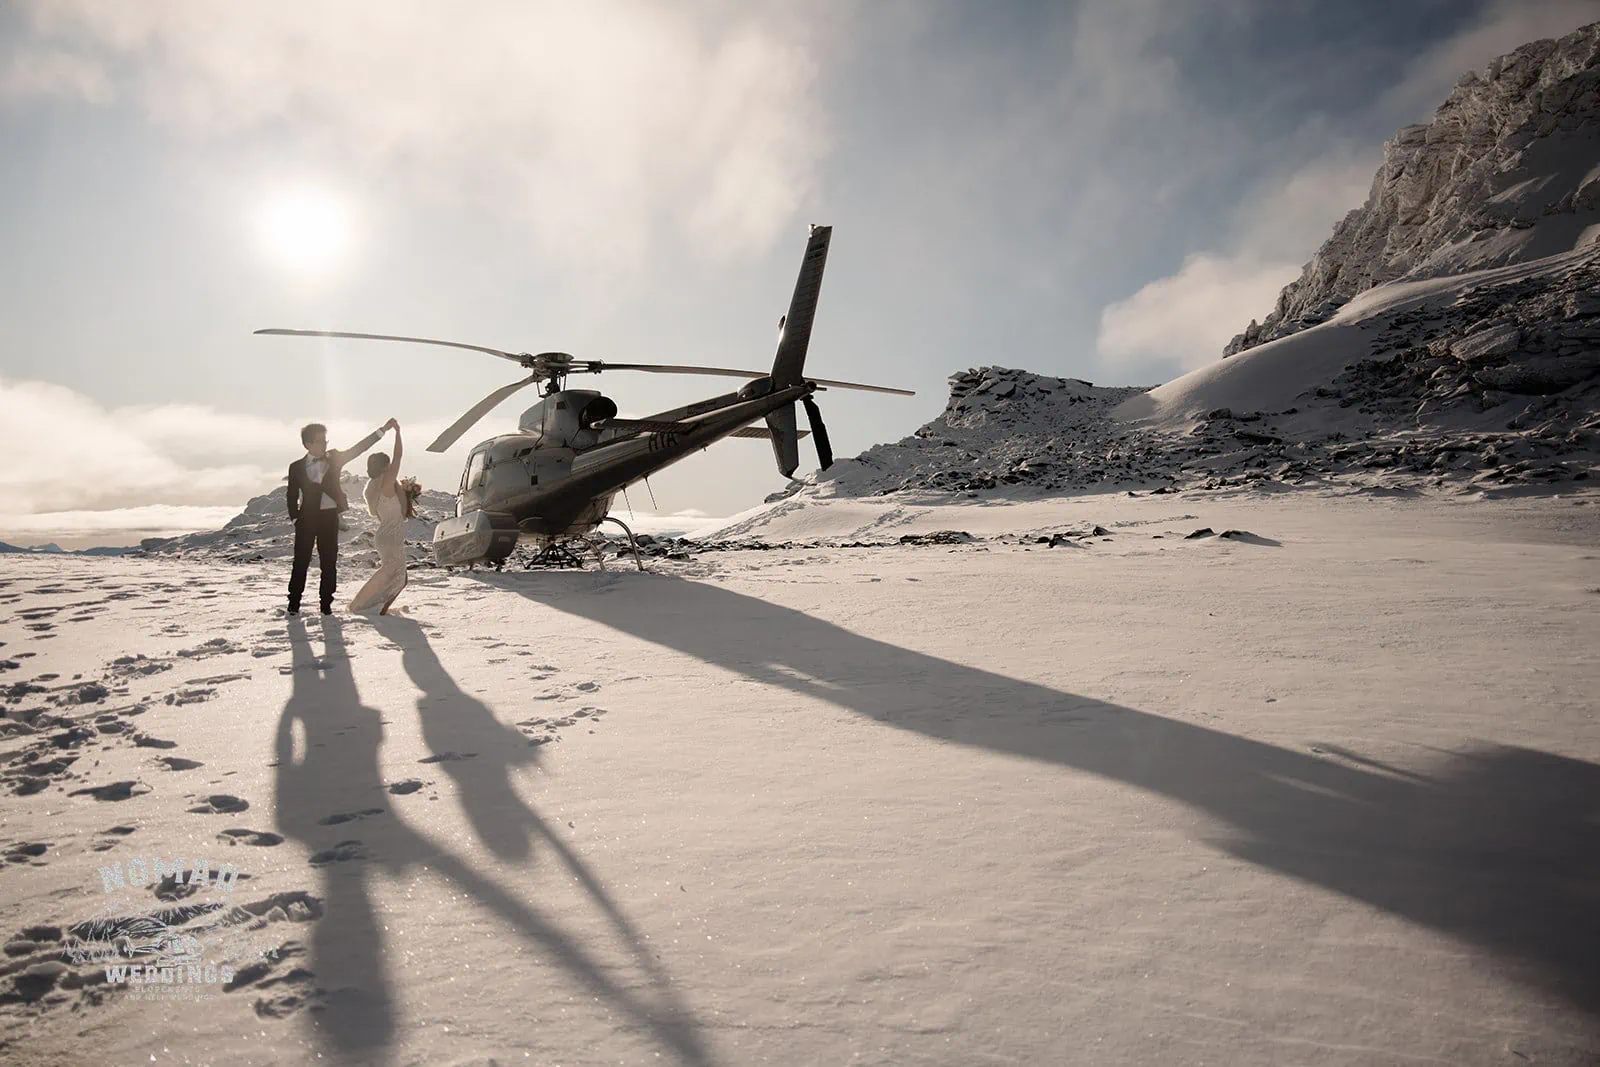 Joanna and Tony pose next to a helicopter during their pre-wedding shoot in snowy Queenstown, New Zealand.